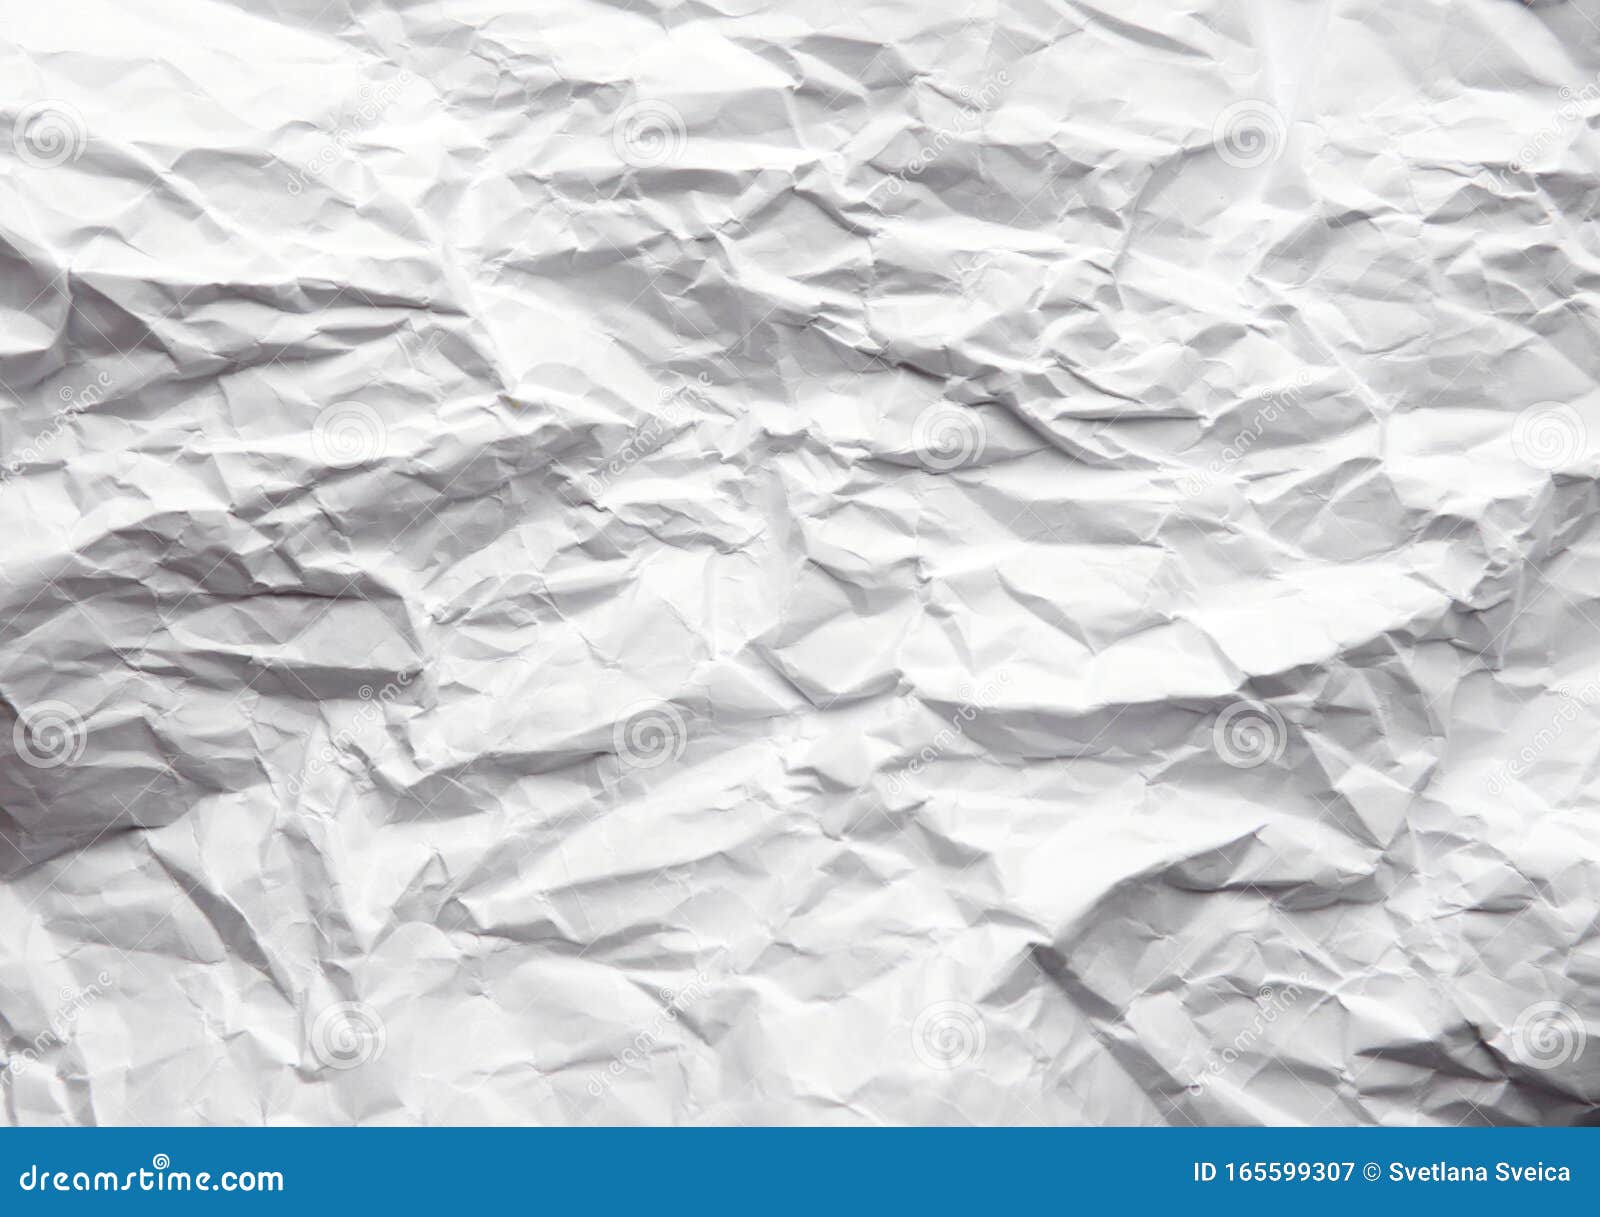 White Abstract Crumpled Paper Background. Old Paper Textures Backgrounds  for Design, Invitation, Decorative Paper Stock Image - Image of letter,  grungy: 165599307